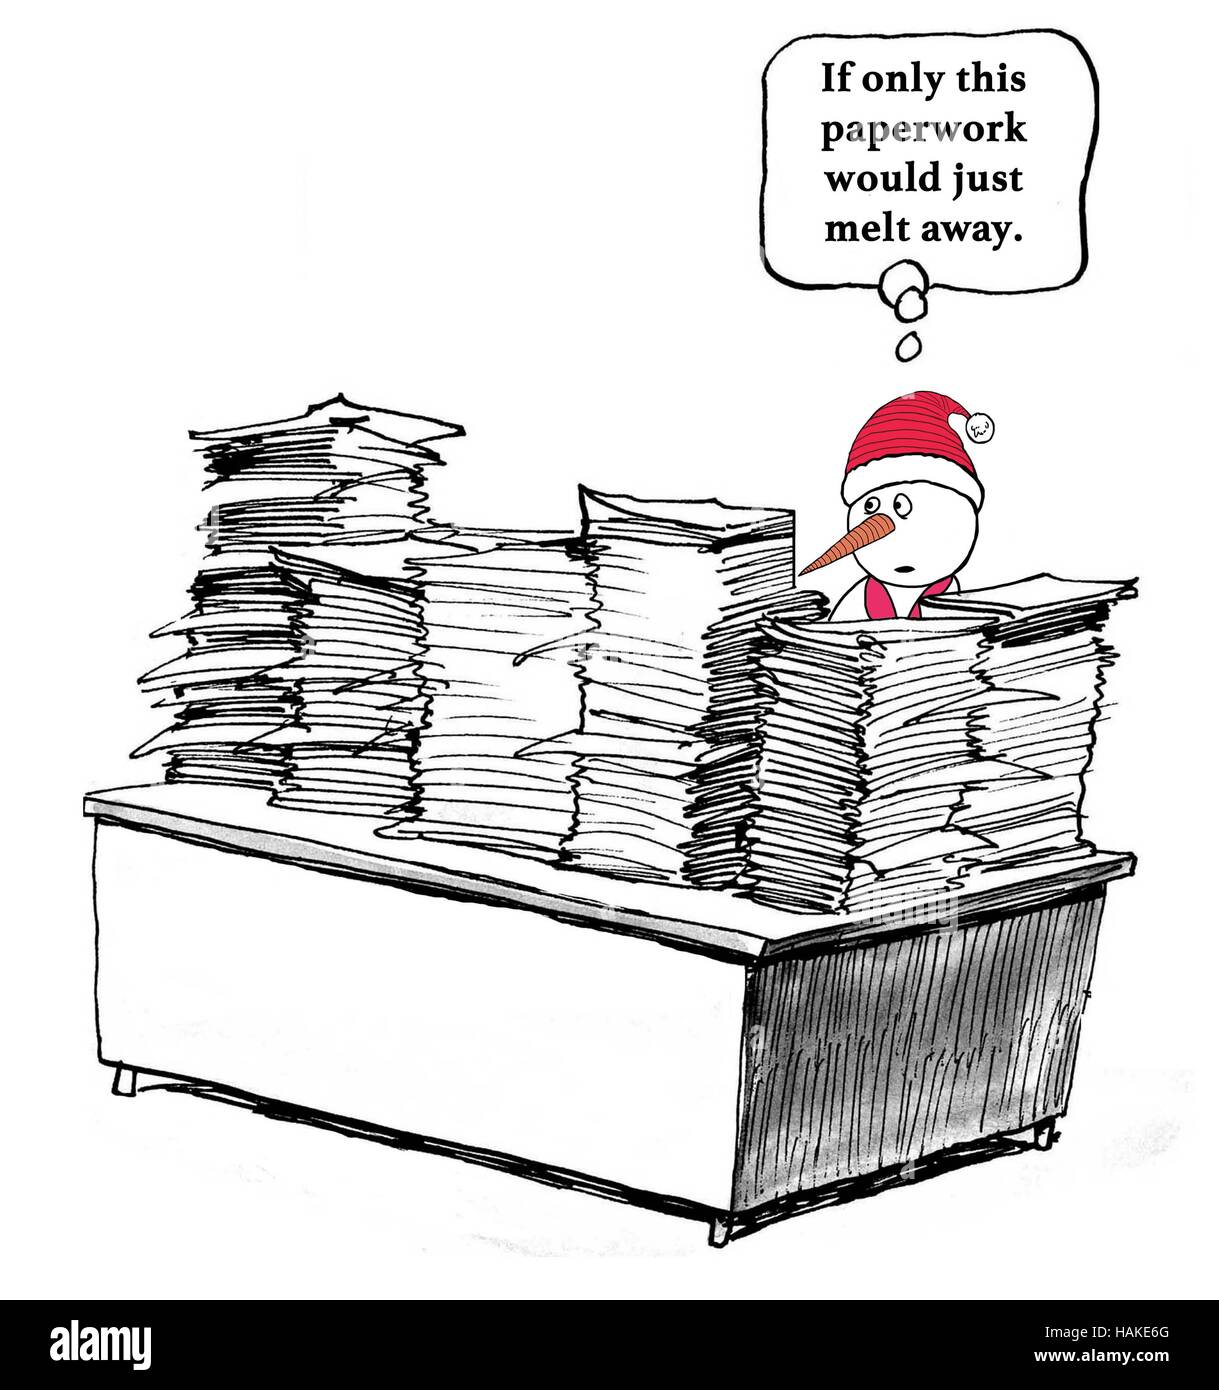 Business cartoon about having too much paperwork. Stock Photo